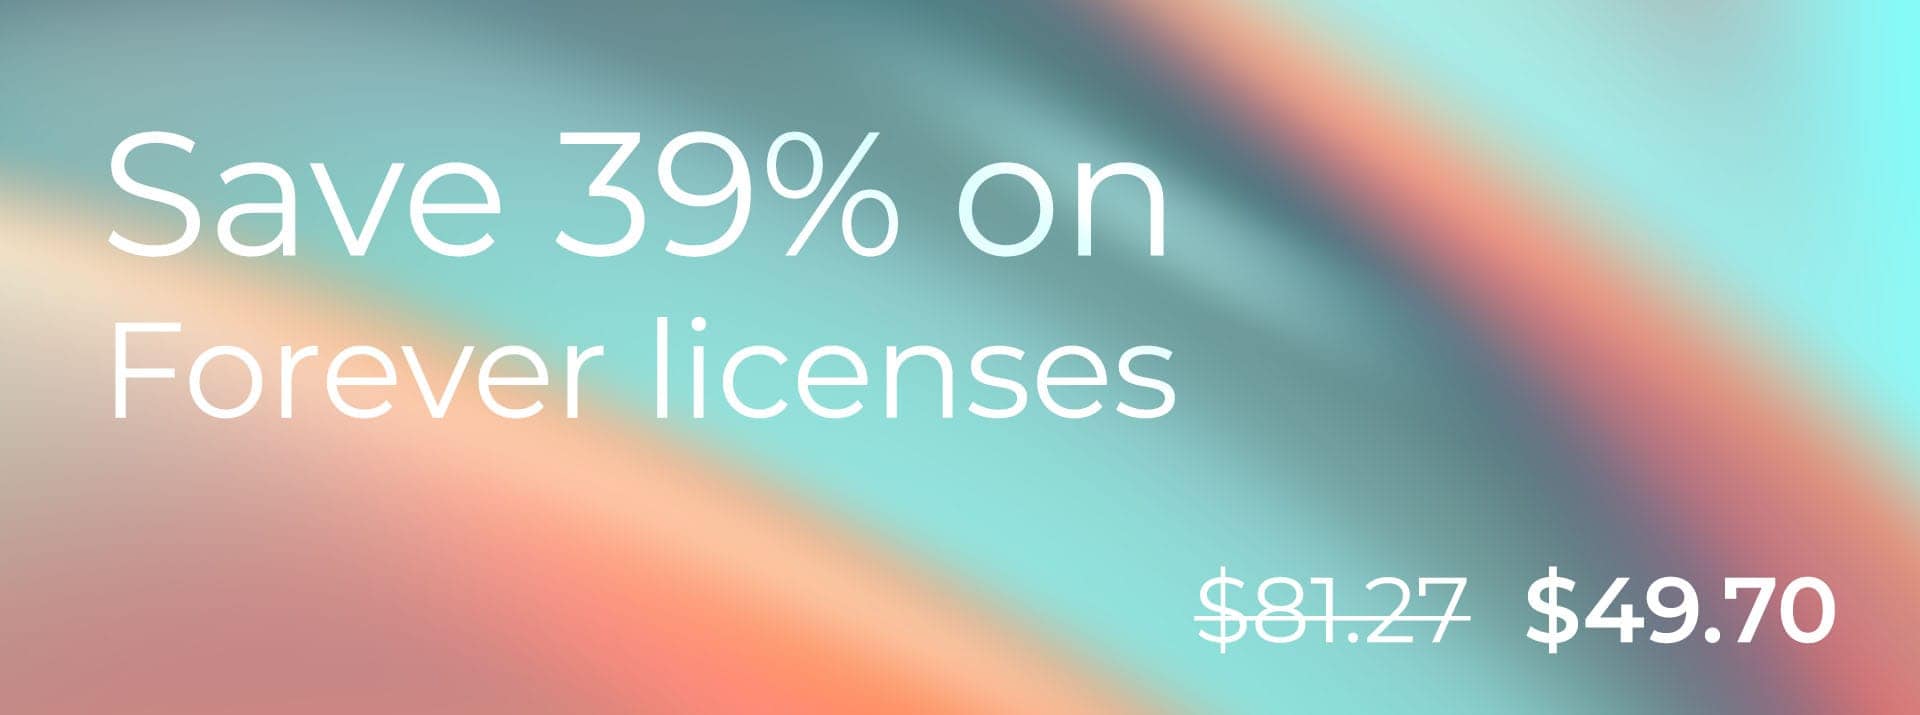 Limited-time sale: 39% off on forever licenses for MyQuickMac Neo and 4-Organizer Ultra